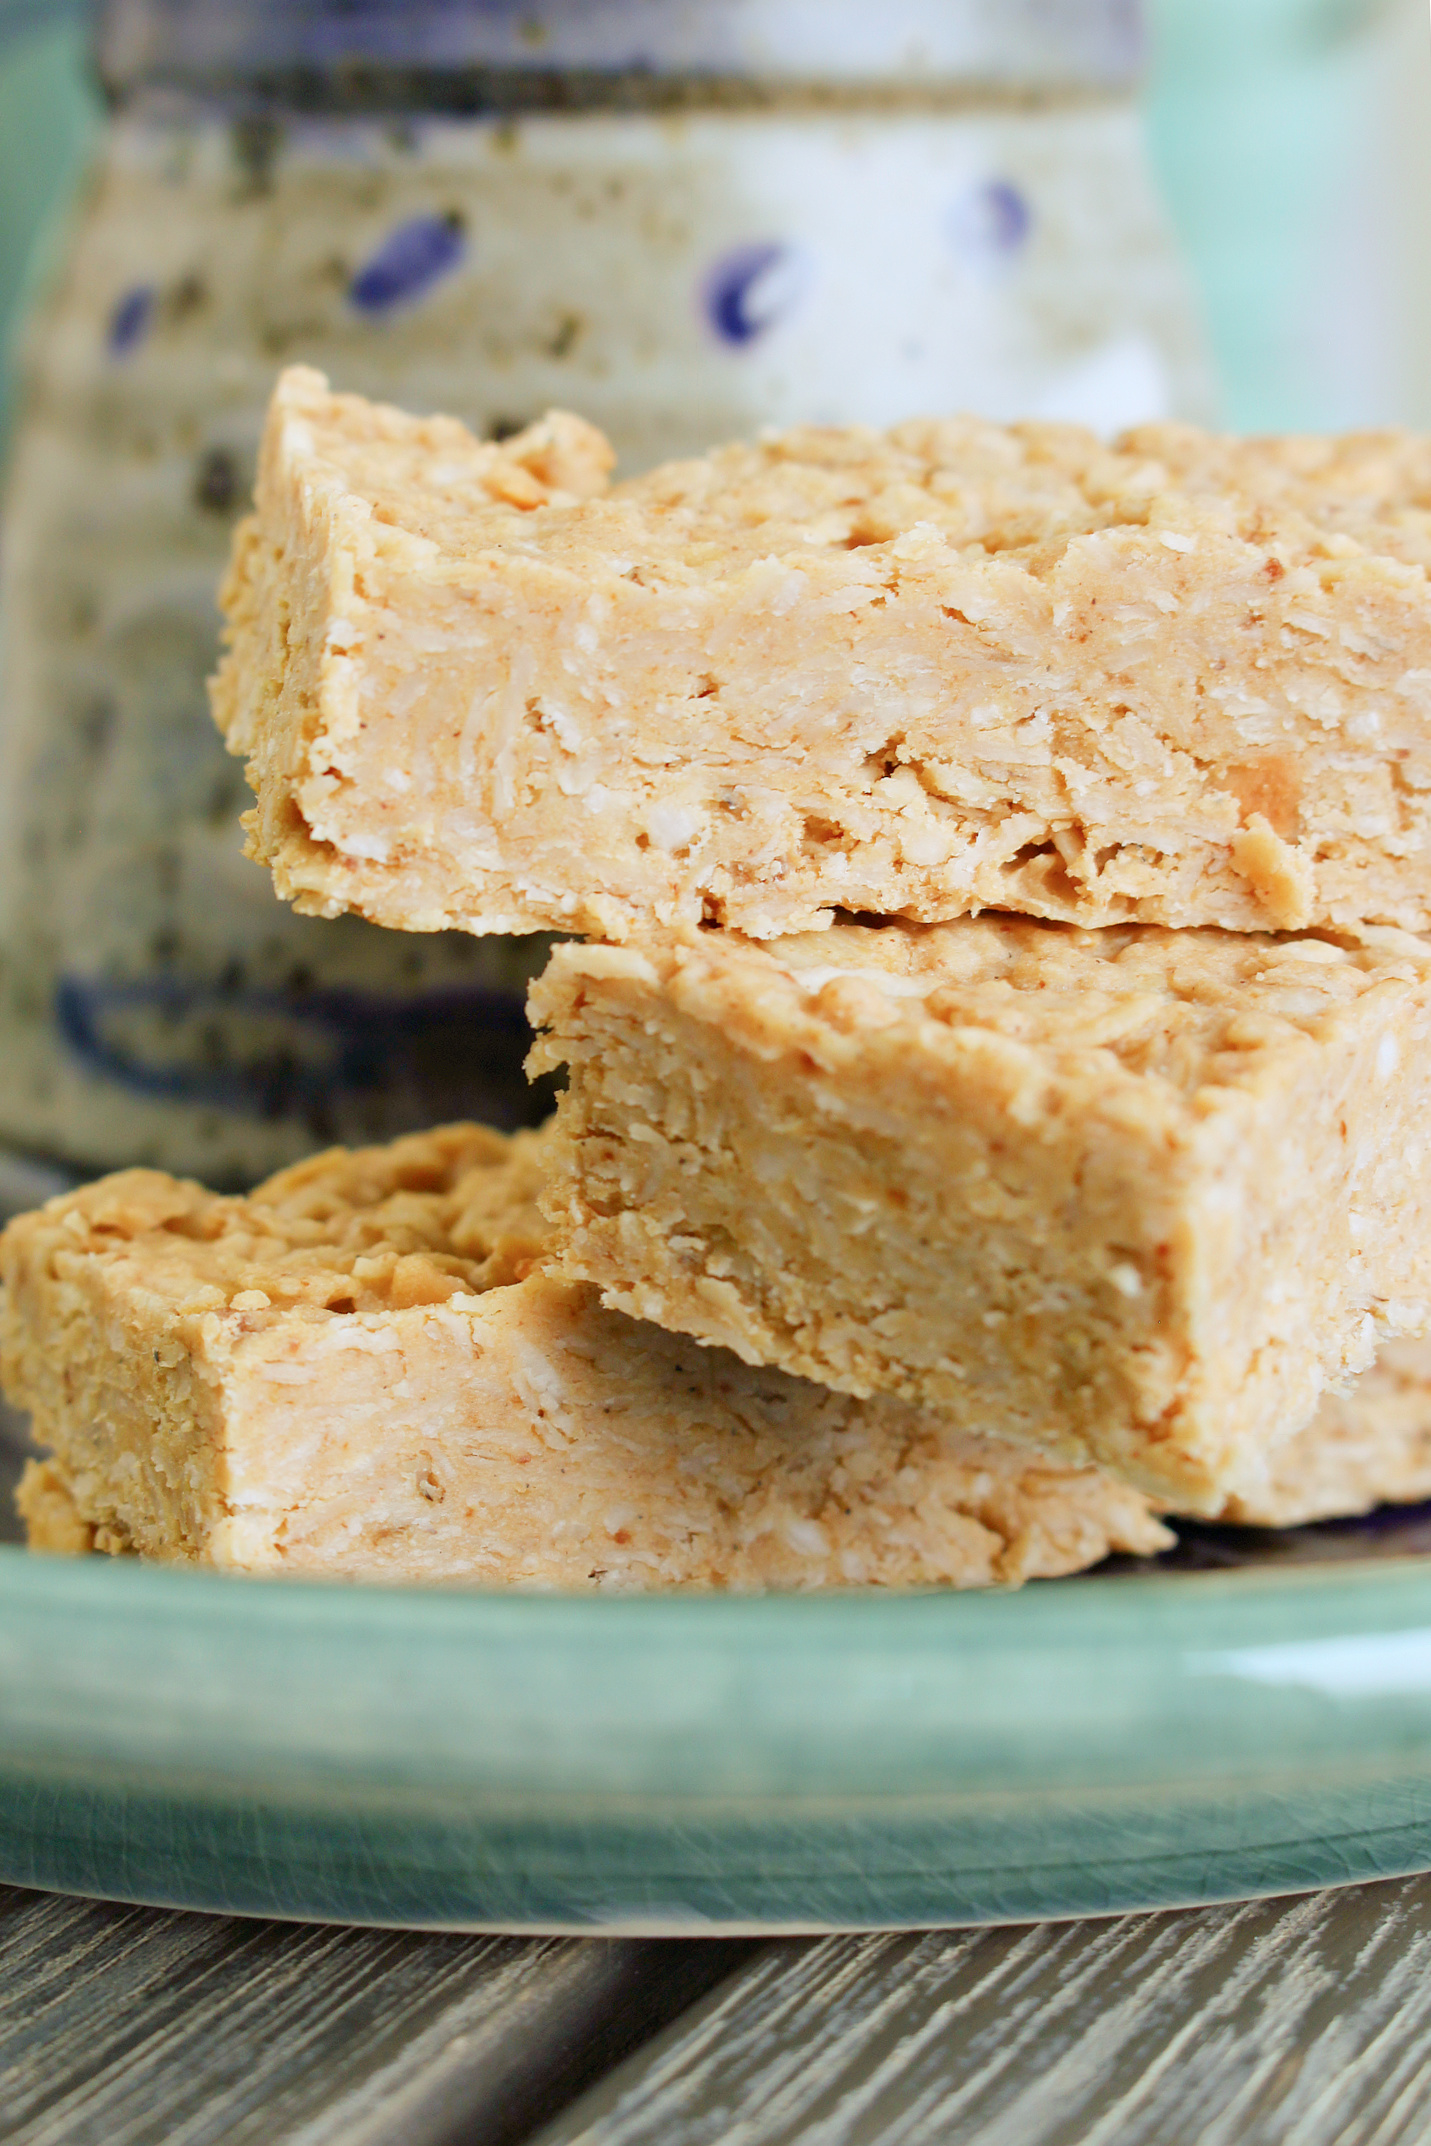 How to Make a Protein Bar at Home